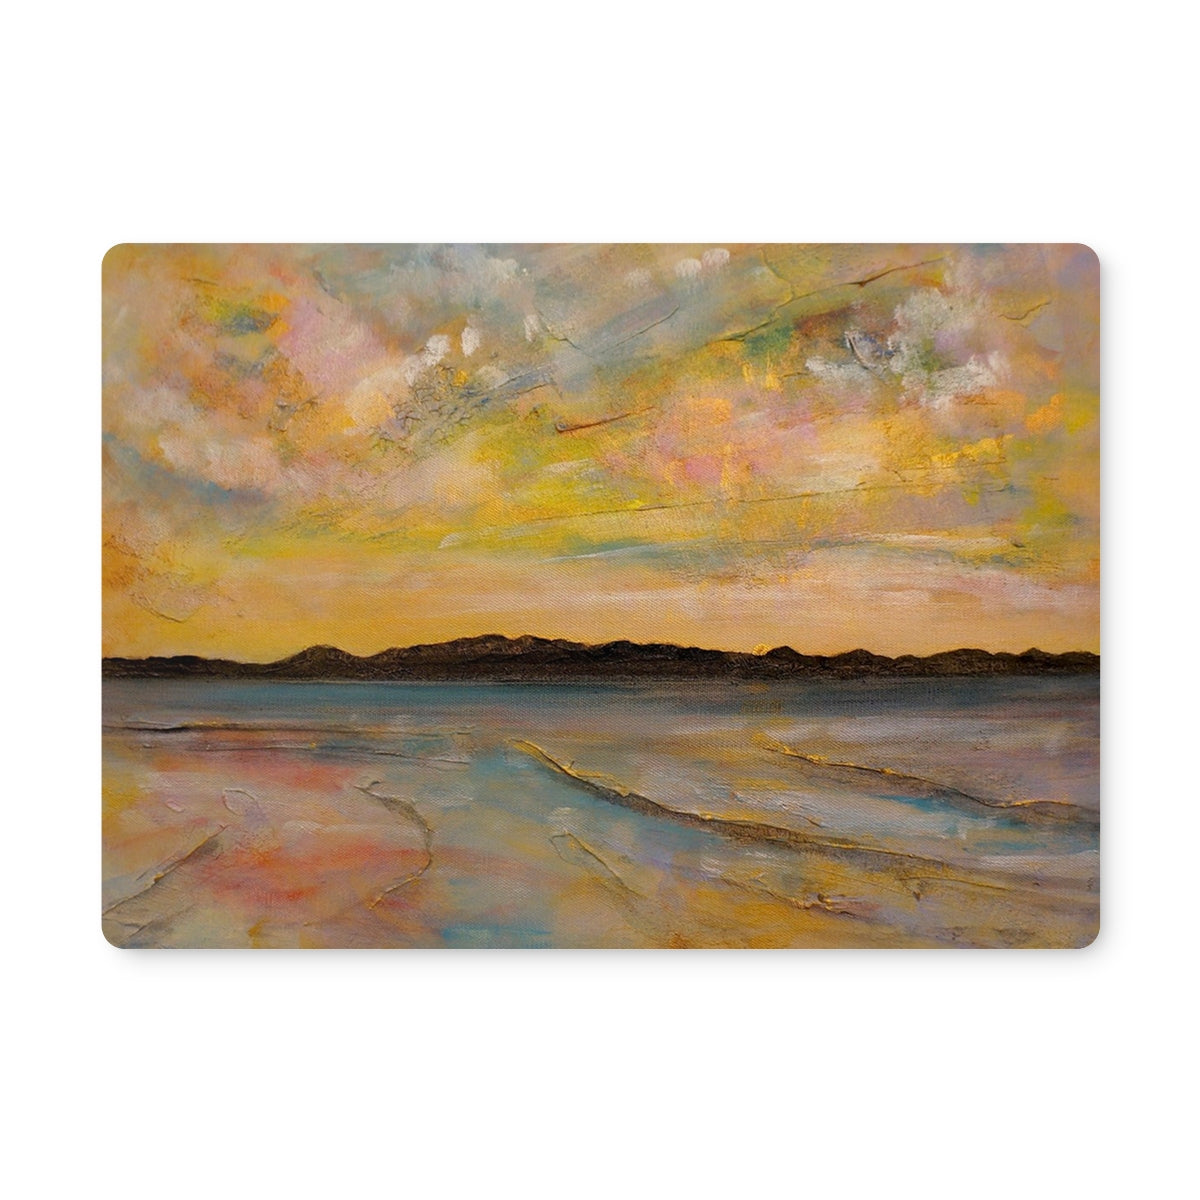 Vallay Island North Uist Art Gifts Placemat-Placemats-Hebridean Islands Art Gallery-2 Placemats-Paintings, Prints, Homeware, Art Gifts From Scotland By Scottish Artist Kevin Hunter